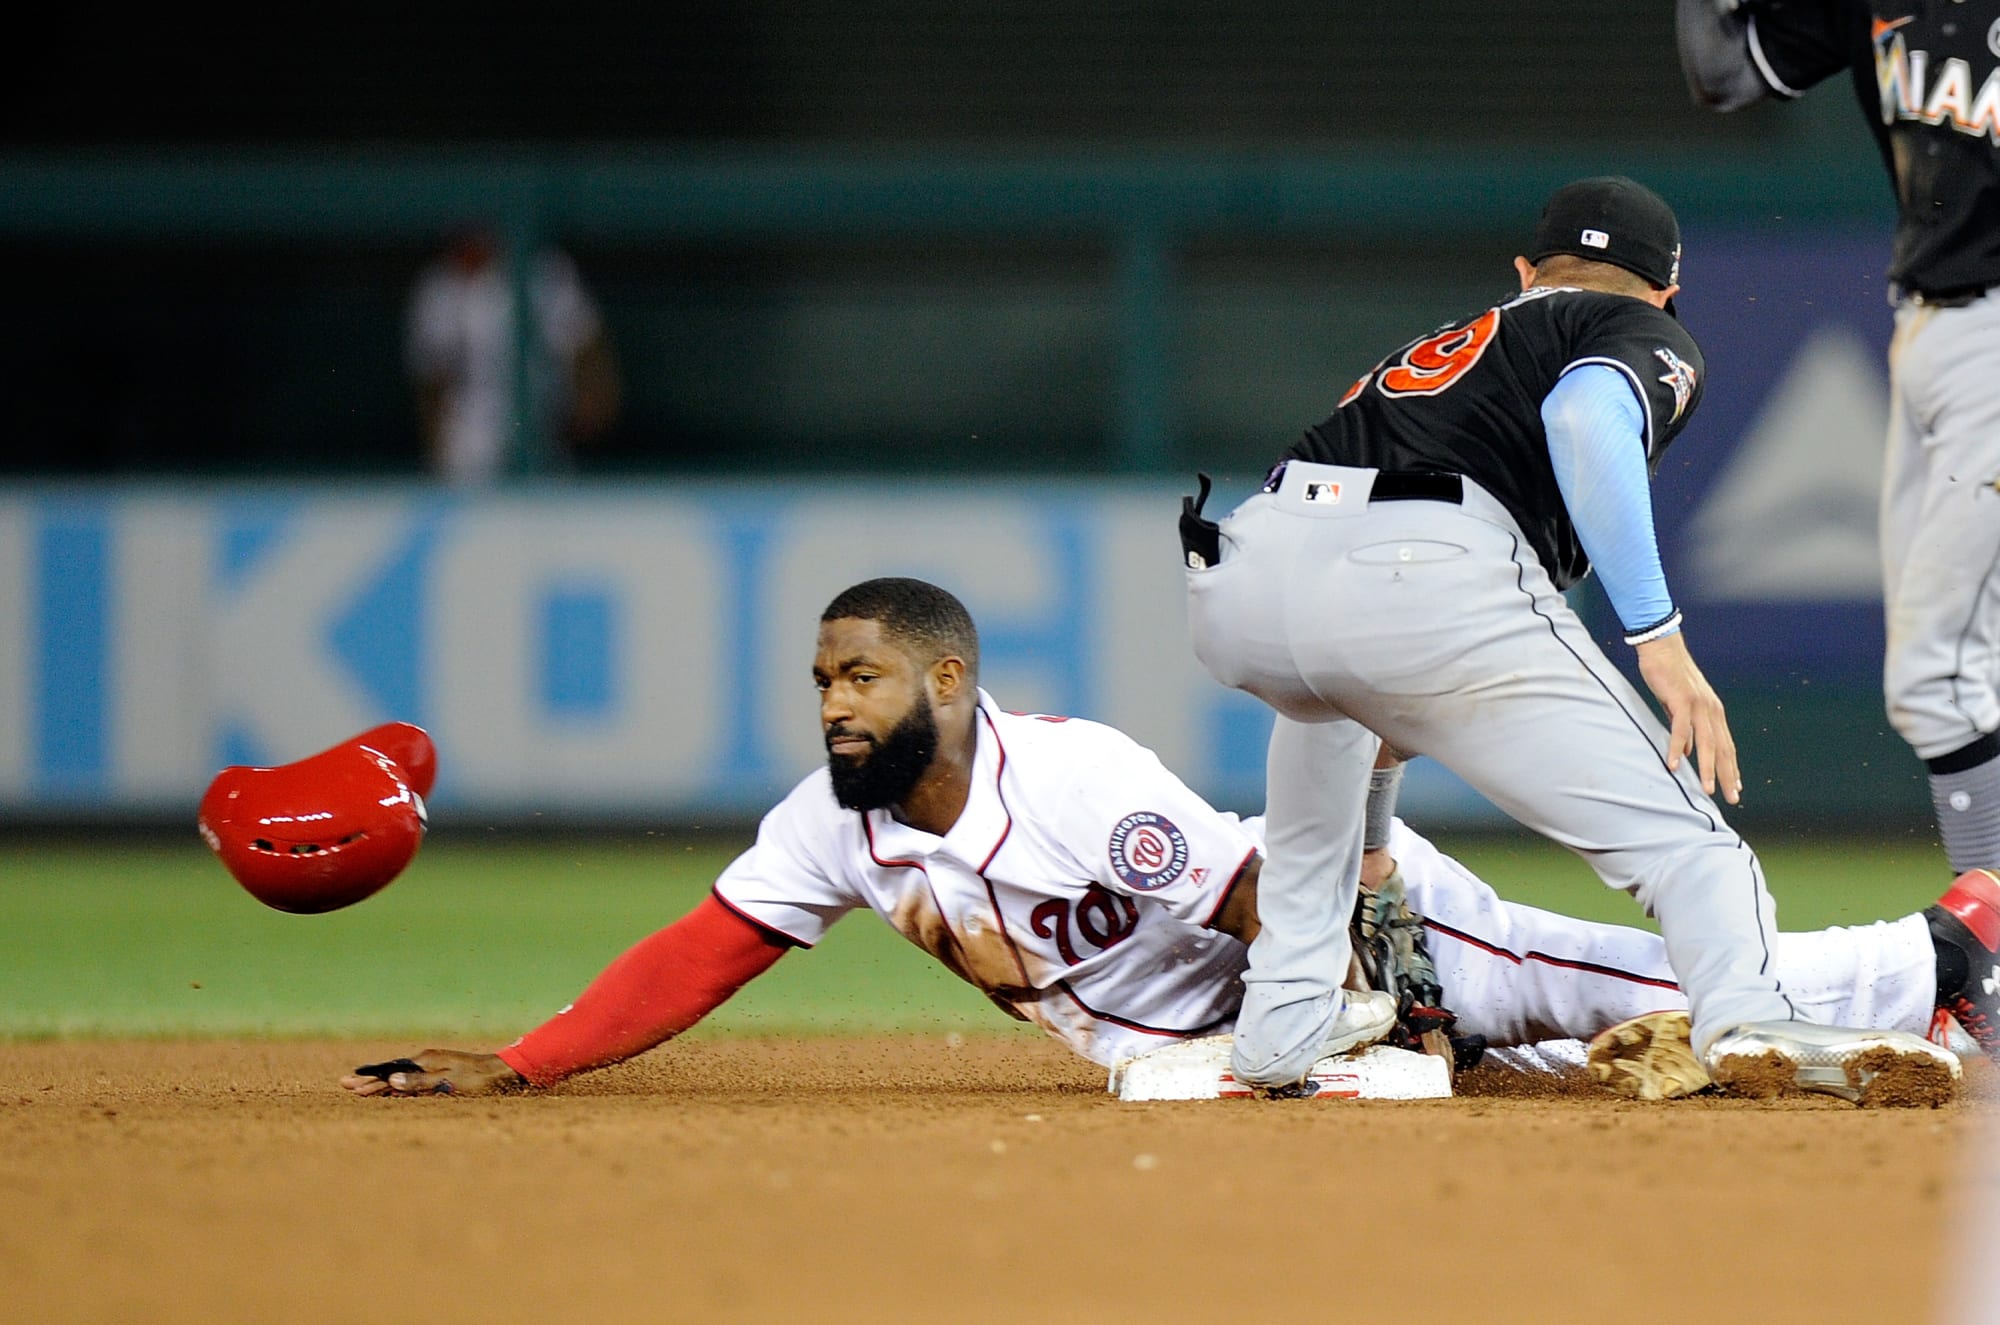 MLB Stolen bases are down. How does it rate historically?